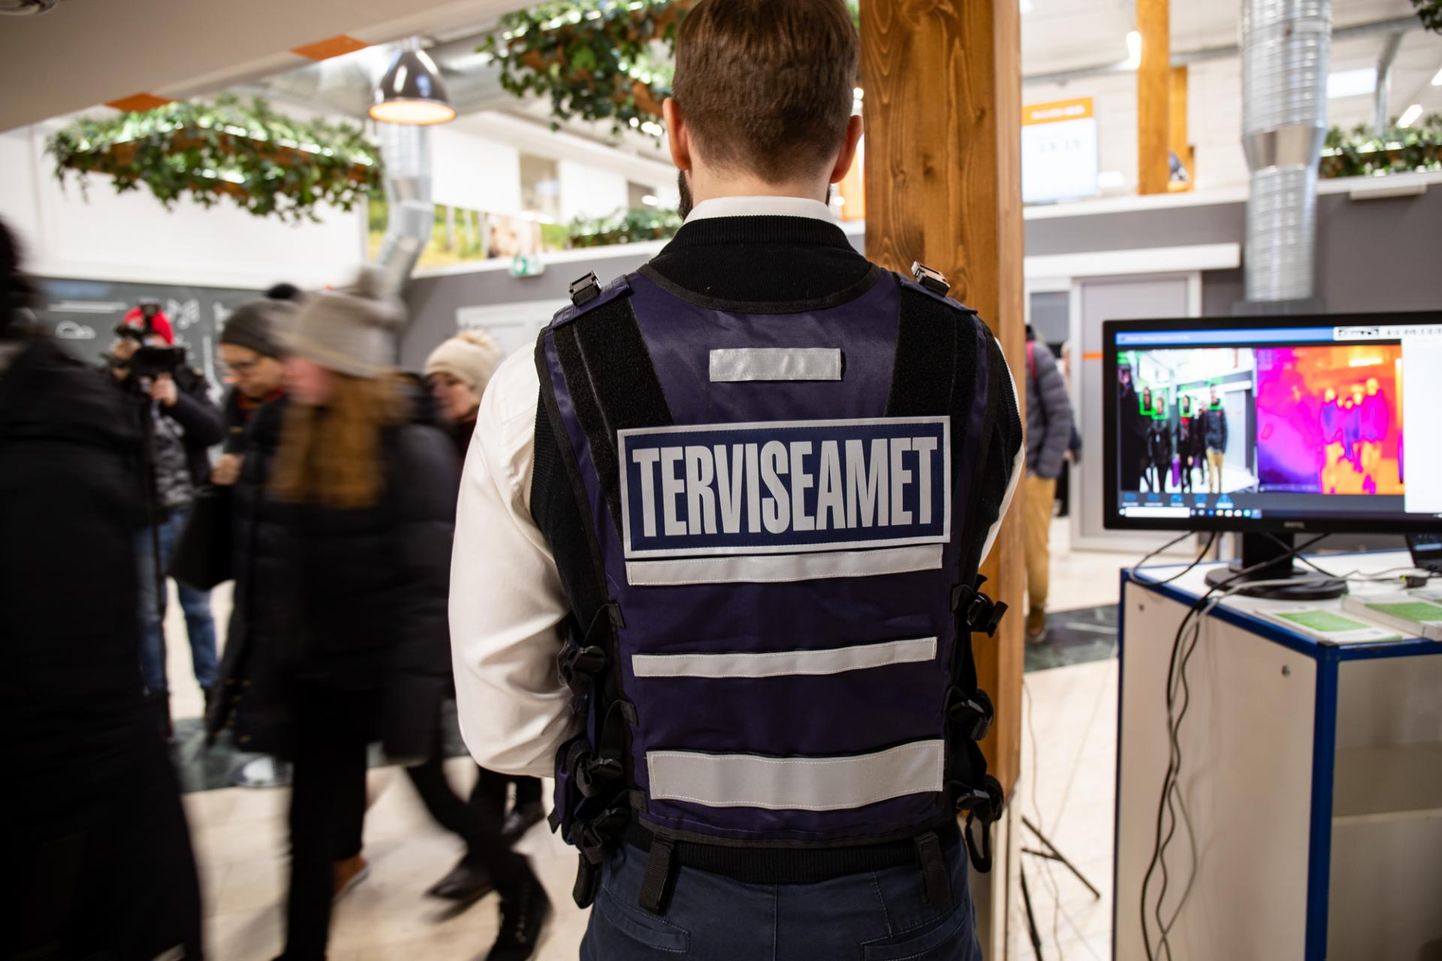 Monitoring of passengers’ body temperature with thermal cameras was tested at the A-terminal of Tallinn’s passenger port.